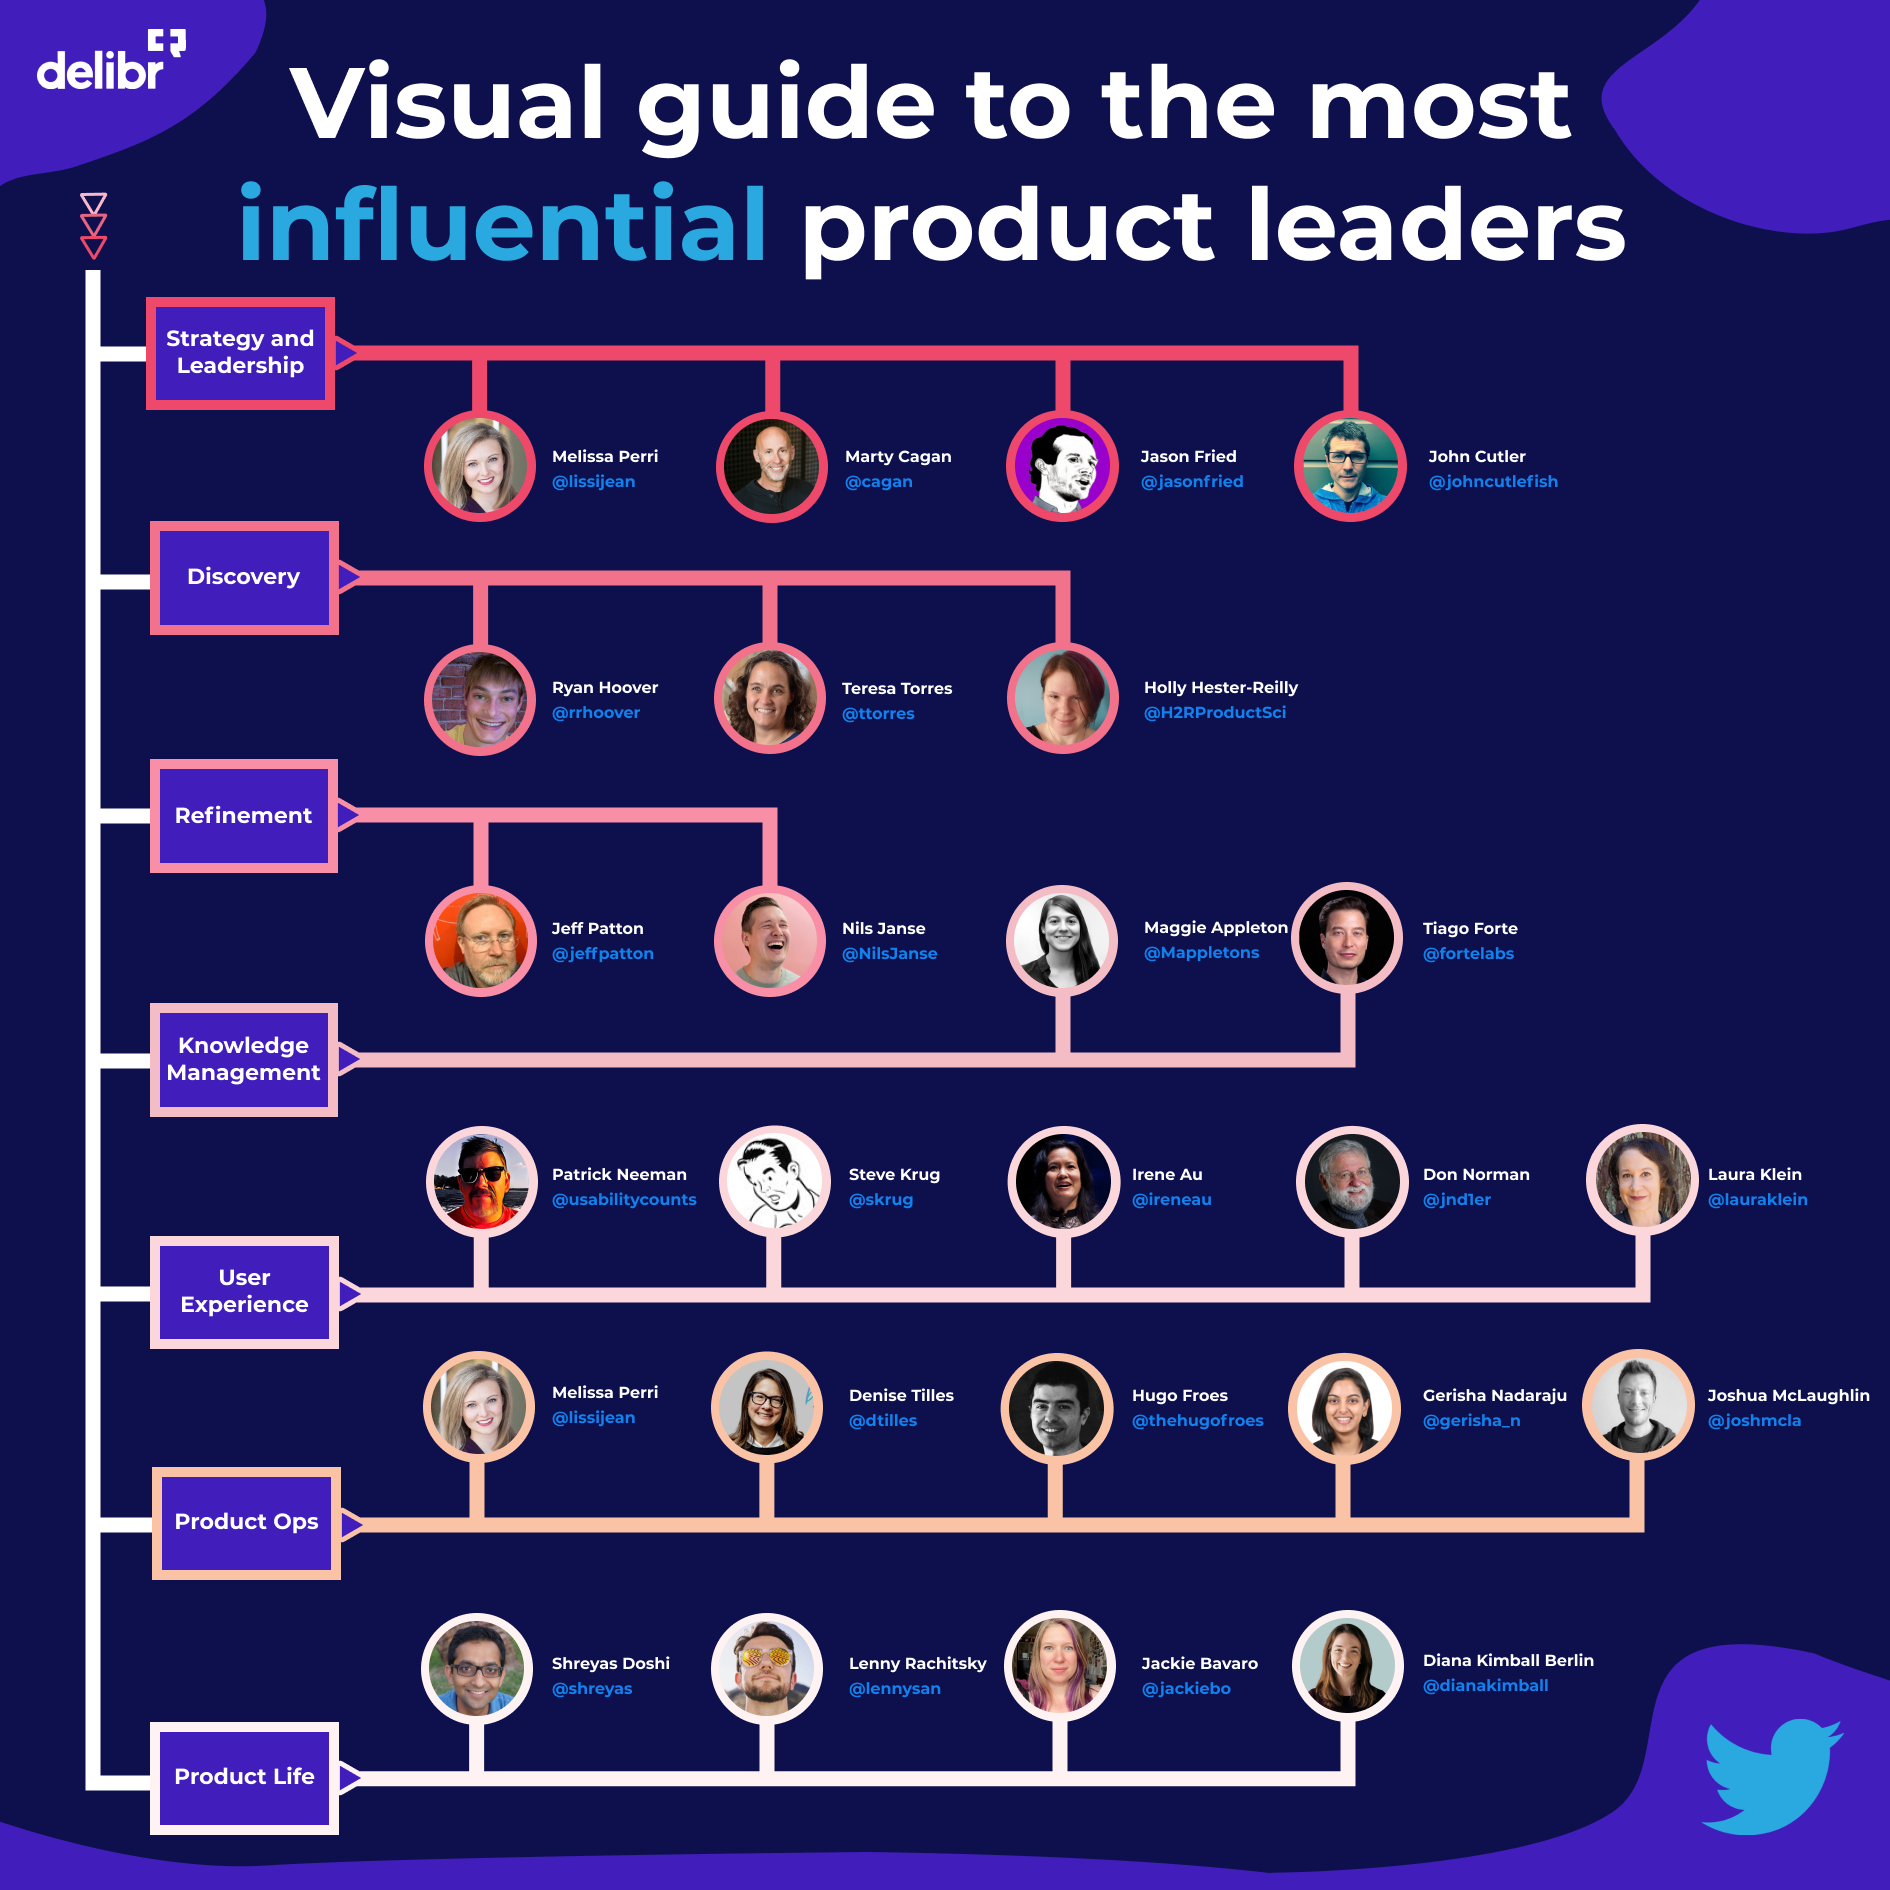 Visual guide to the most influential product leaders